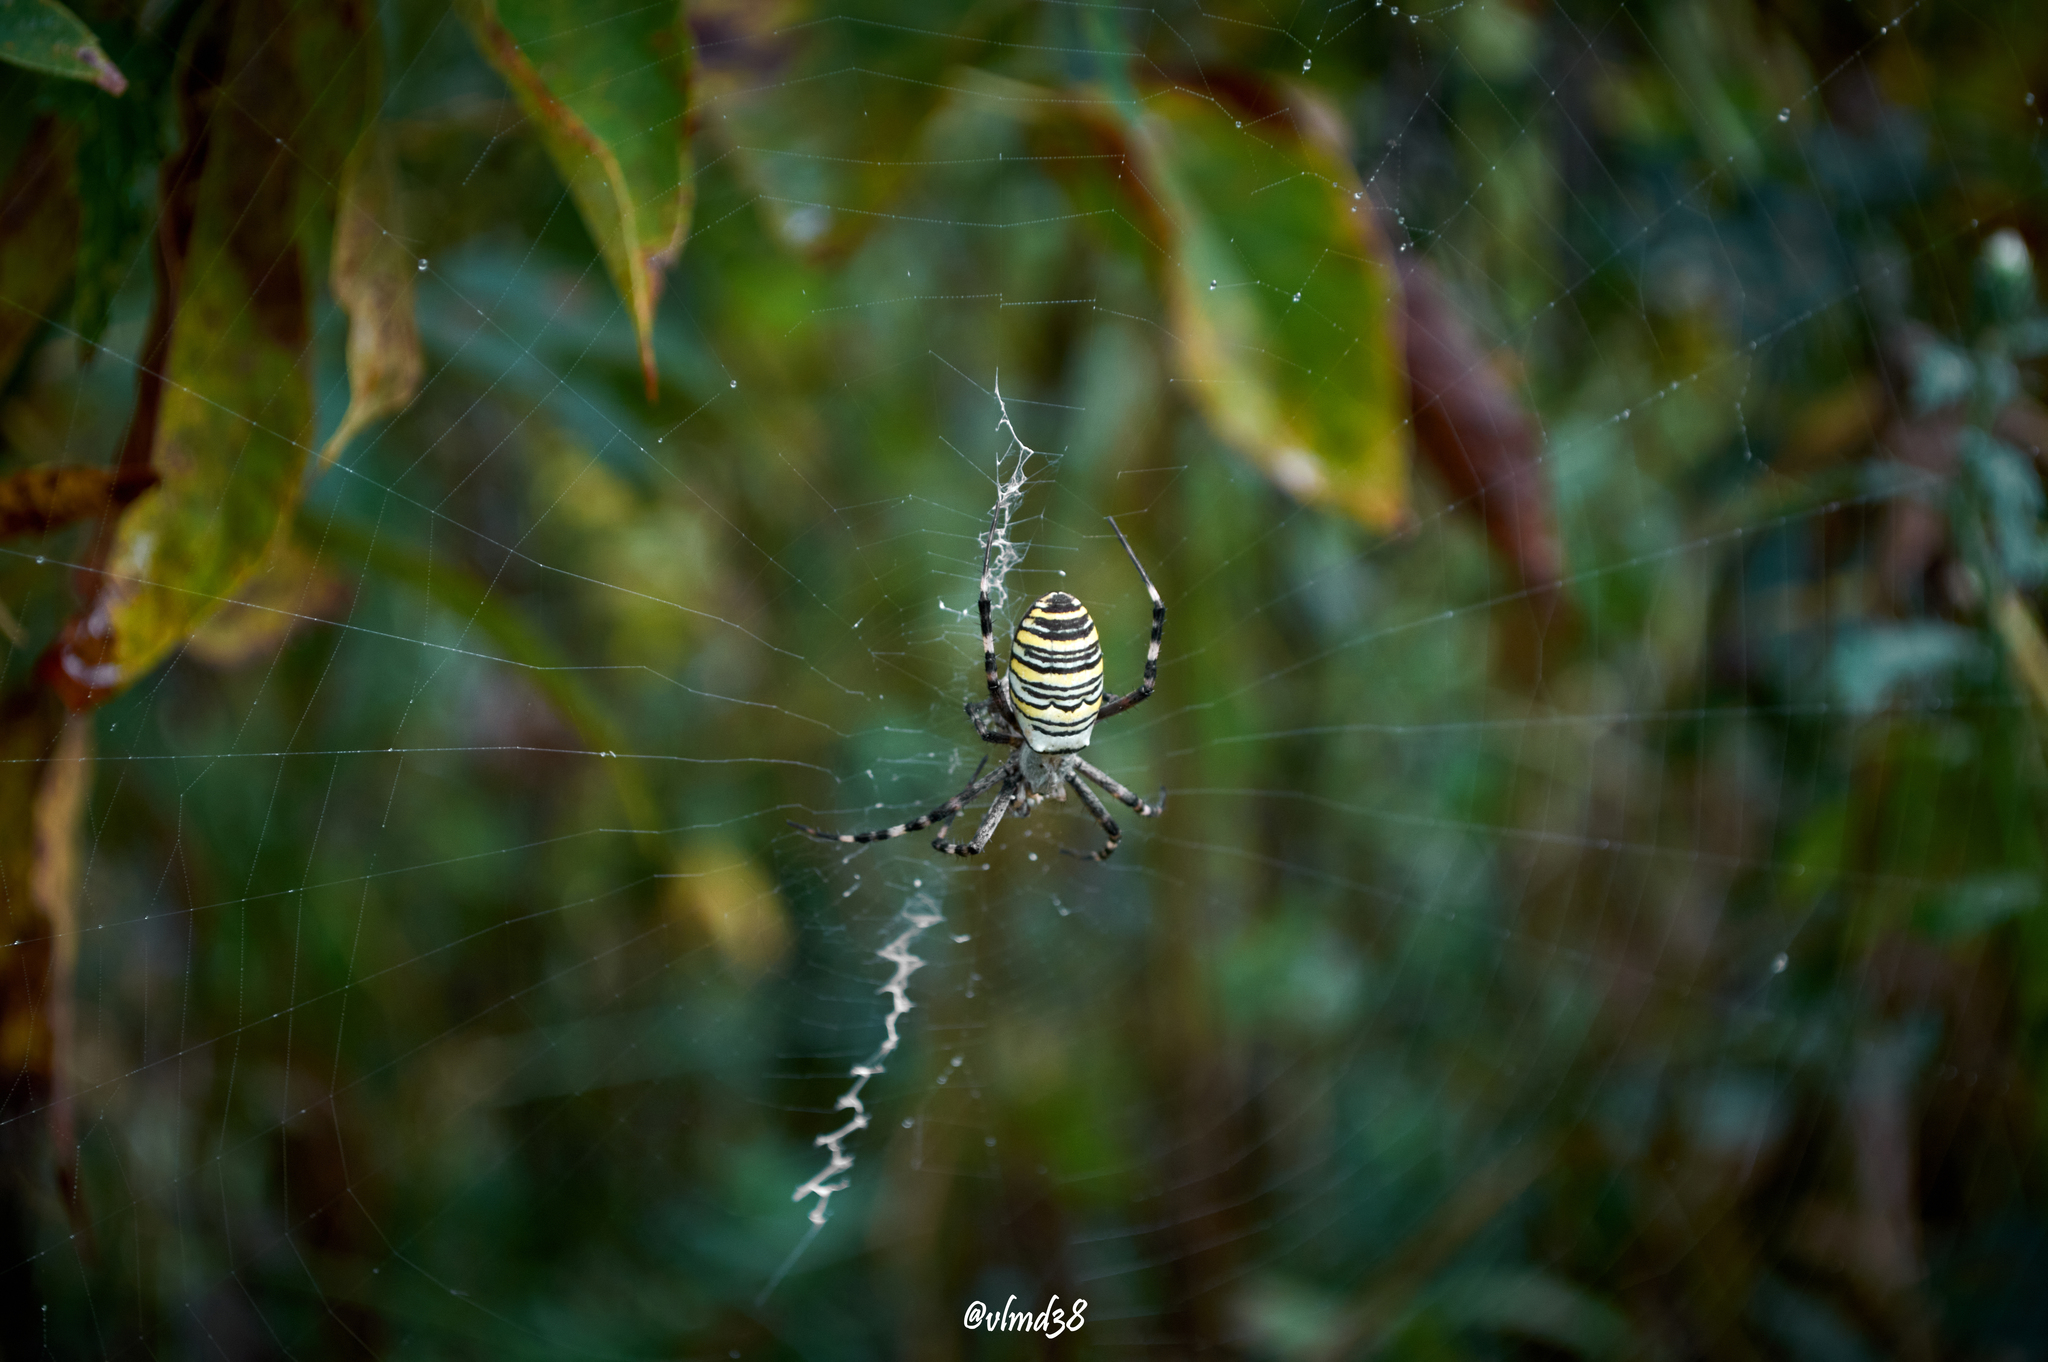 Some macro photography... - My, Macro photography, Nikon, Photographer, Spider, Insects, The photo, Longpost